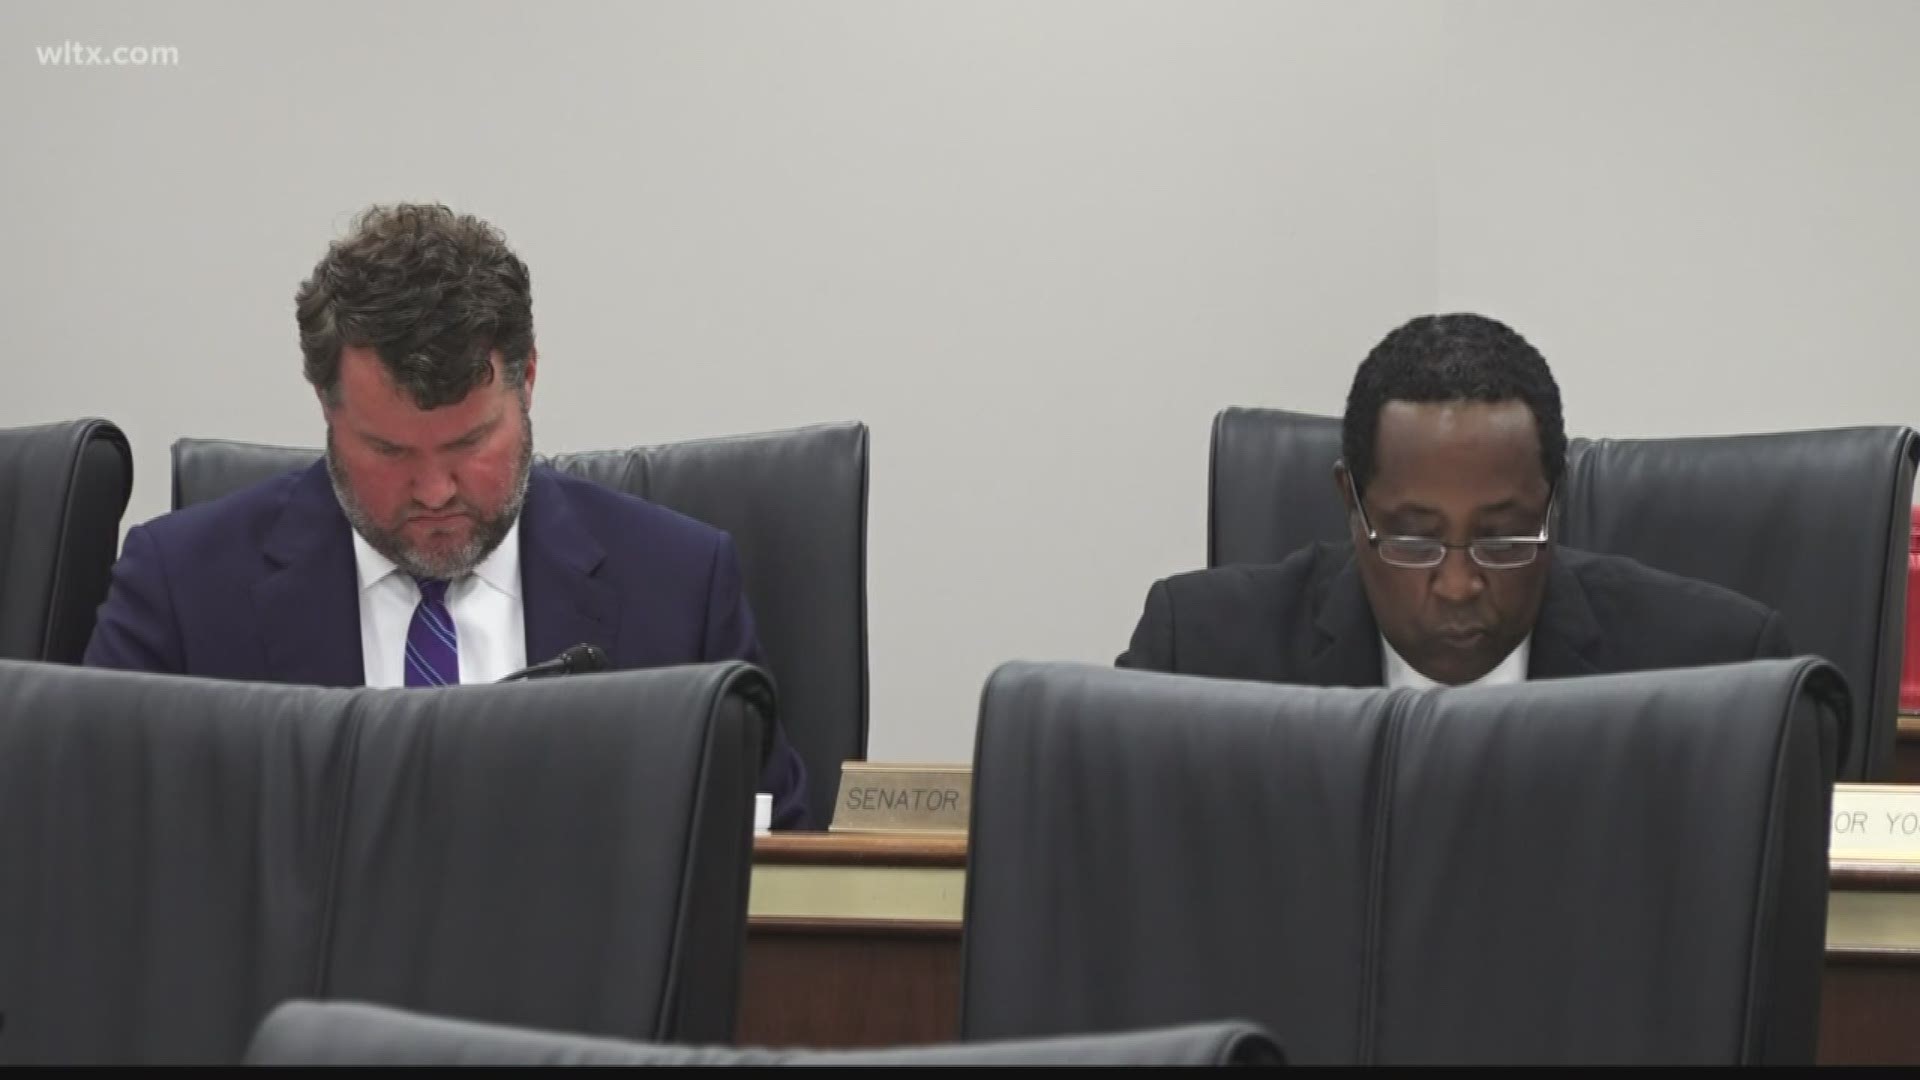 A South Carolina Senate education subcommittee met to discuss potential changes to the University of South Carolina board.